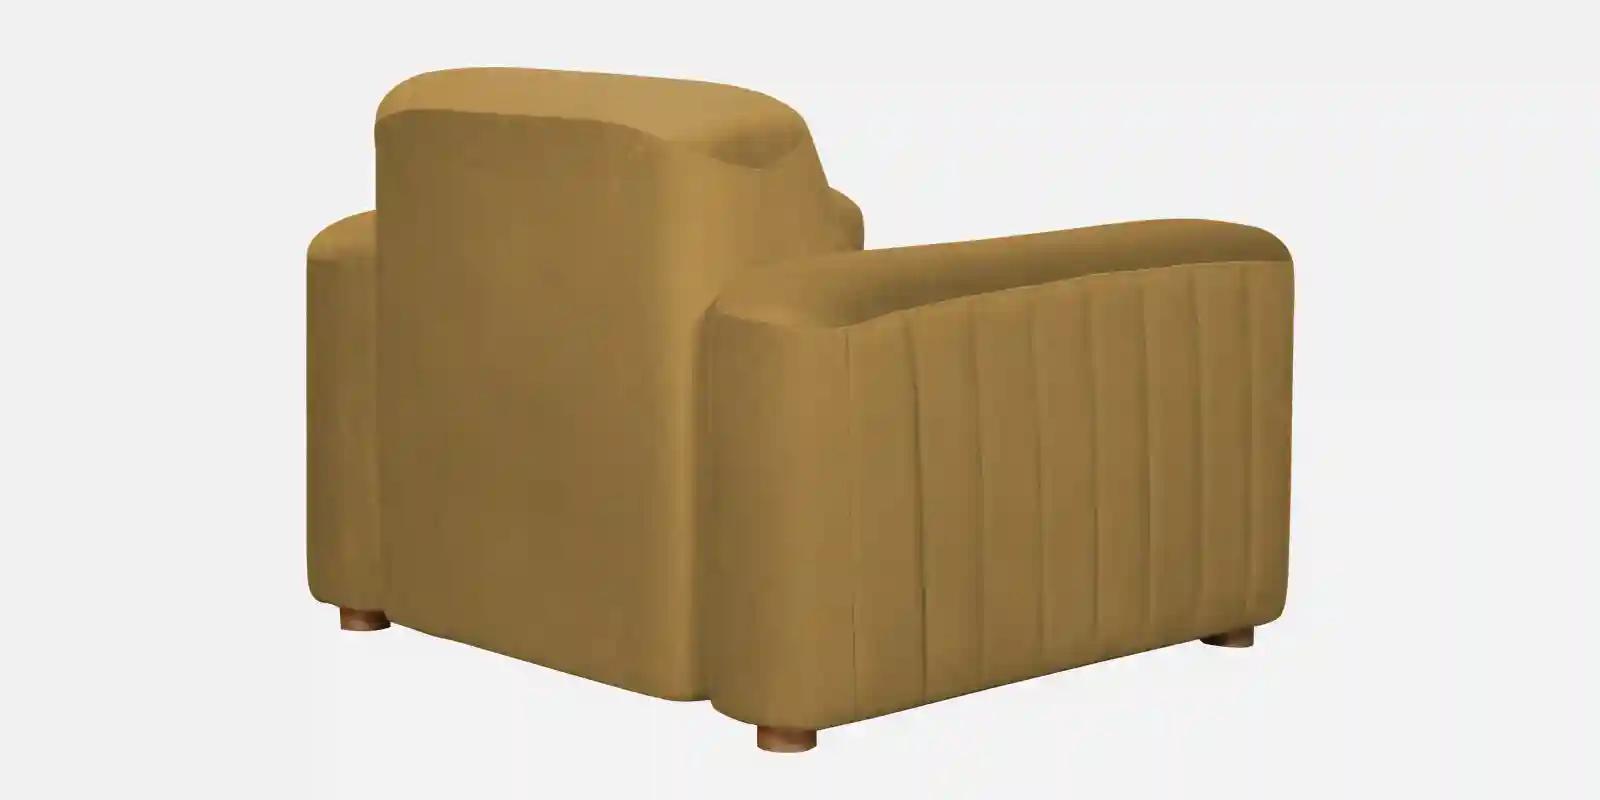 Pine Wood Polyester Fabric Sofa Beige -1 Seater